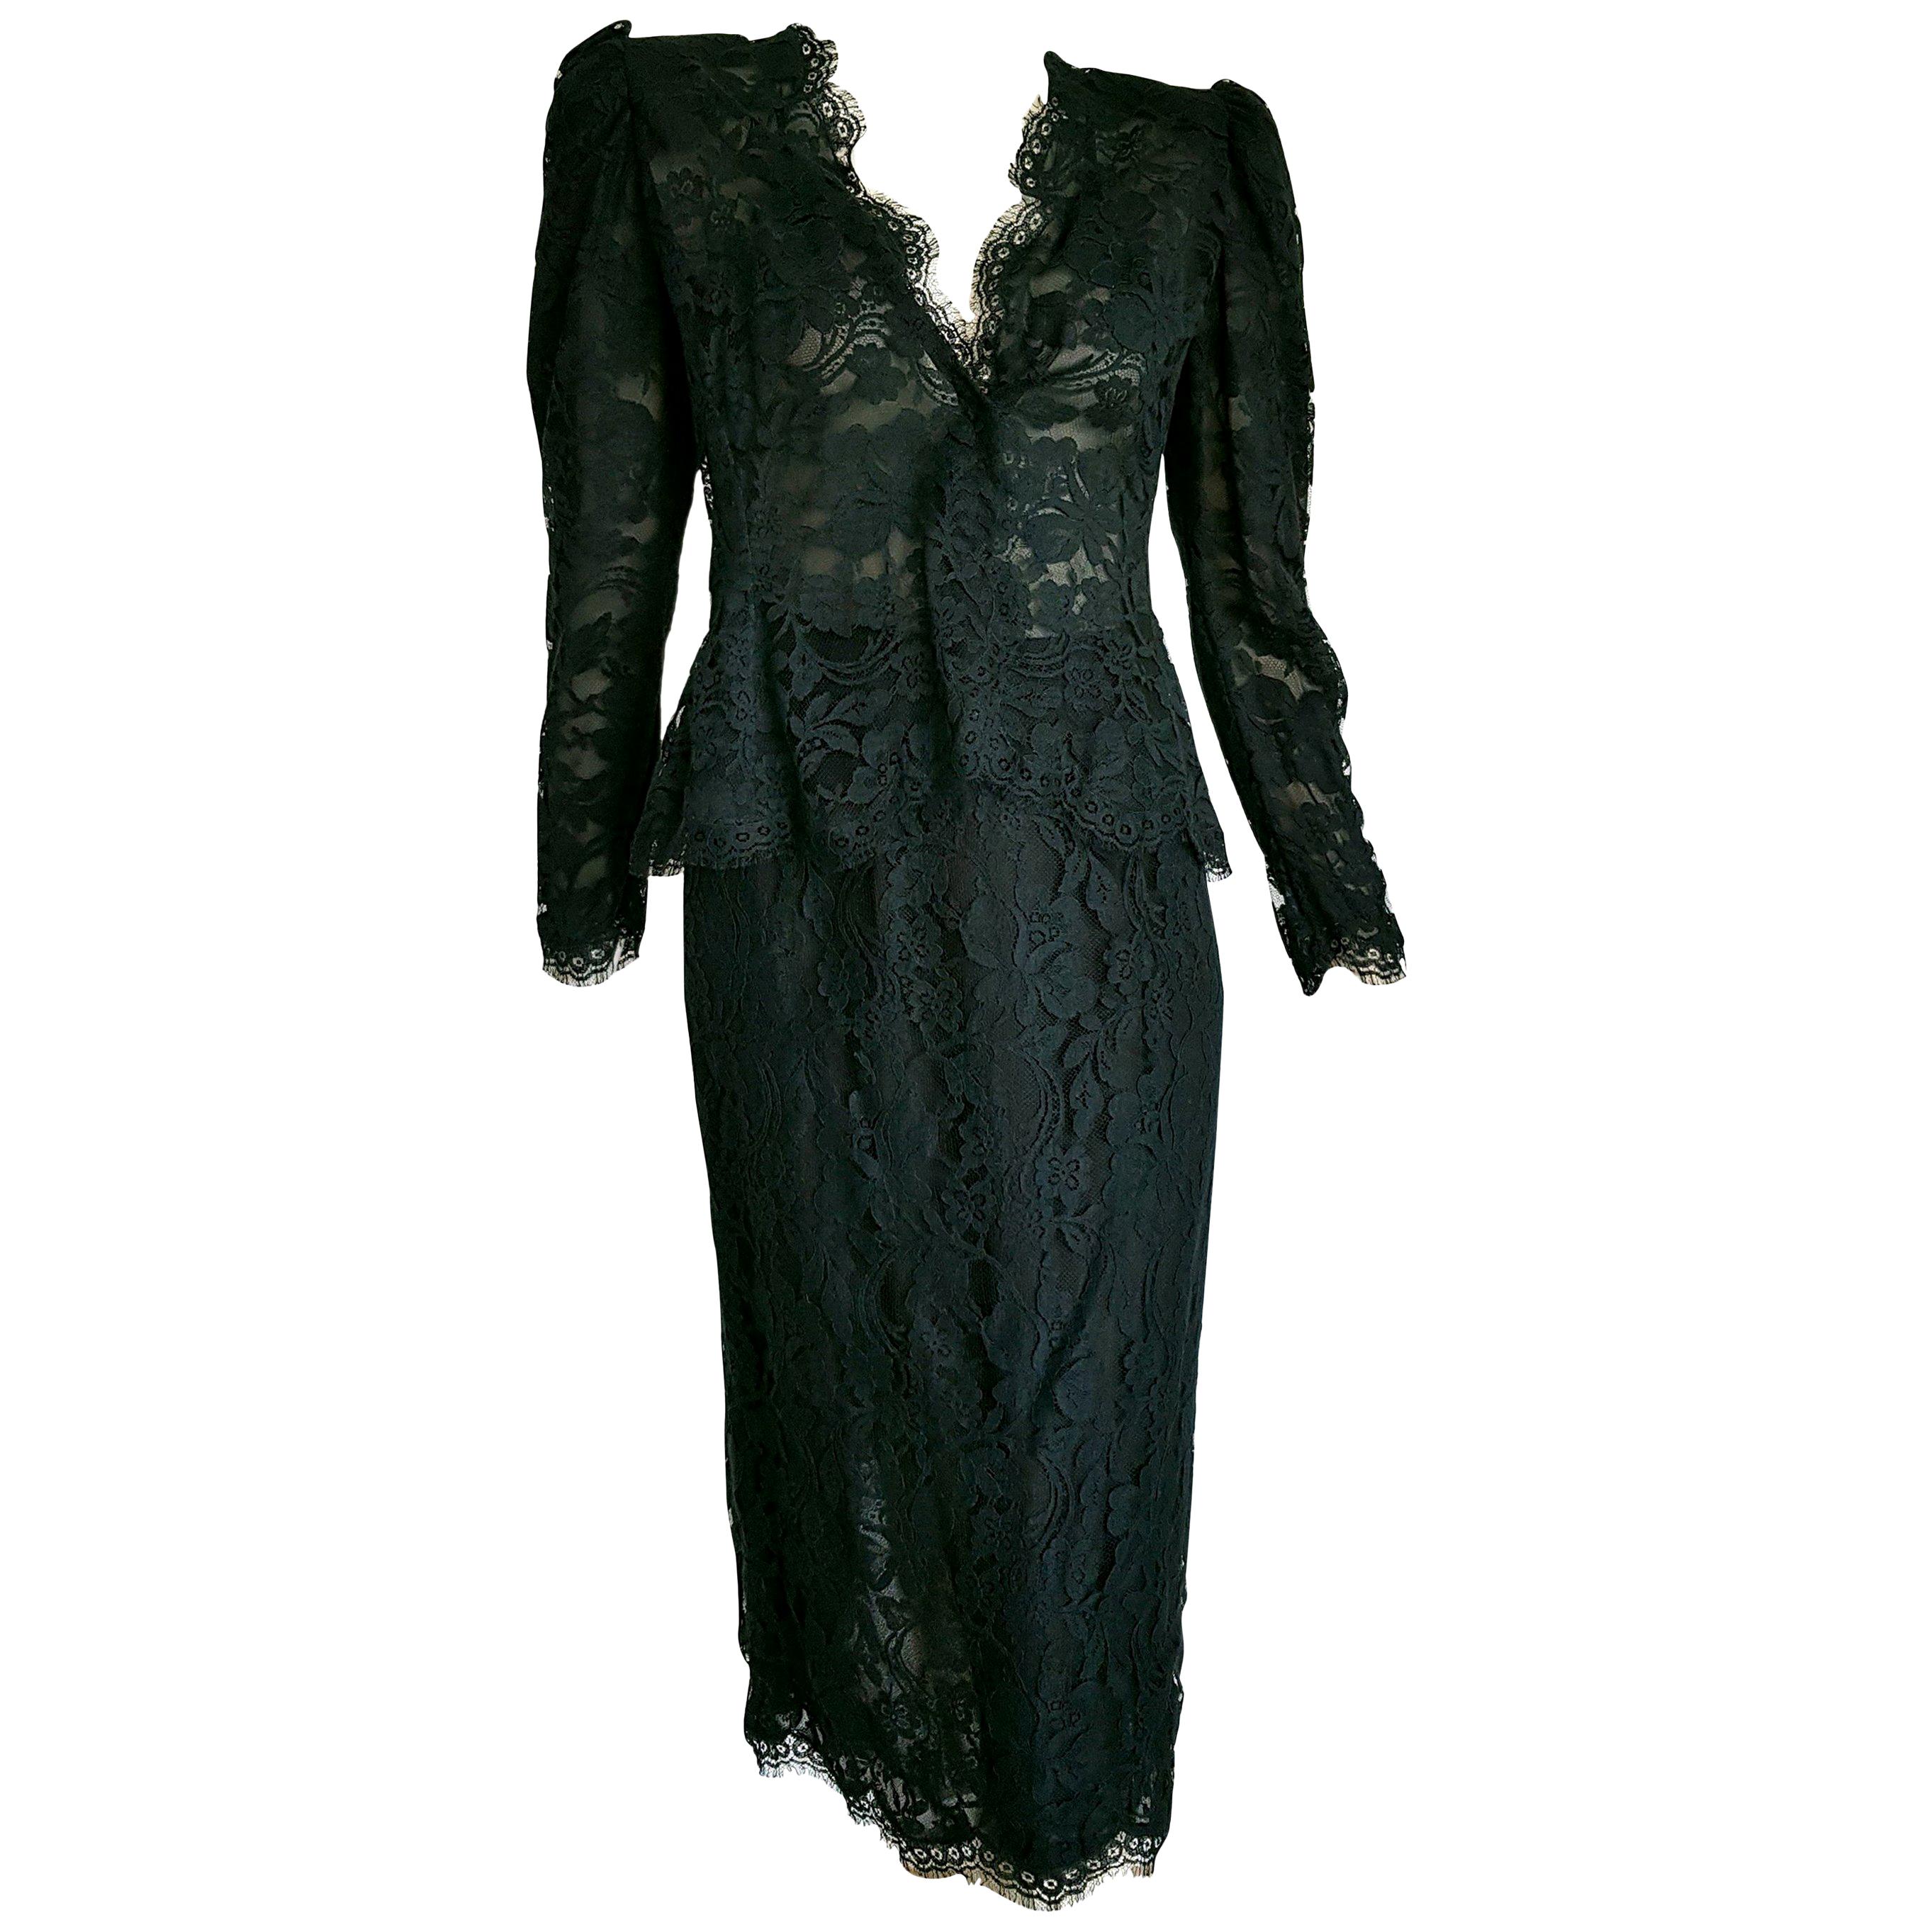 VALENTINO black lace, flowers designs, slightly transparent the jacket, silk skirt suit - Unworn, New.
..
SIZE: equivalent to about Small / Medium, please review approx measurements as follows in cm. 
JACKET: lenght 56, chest underarm to underarm